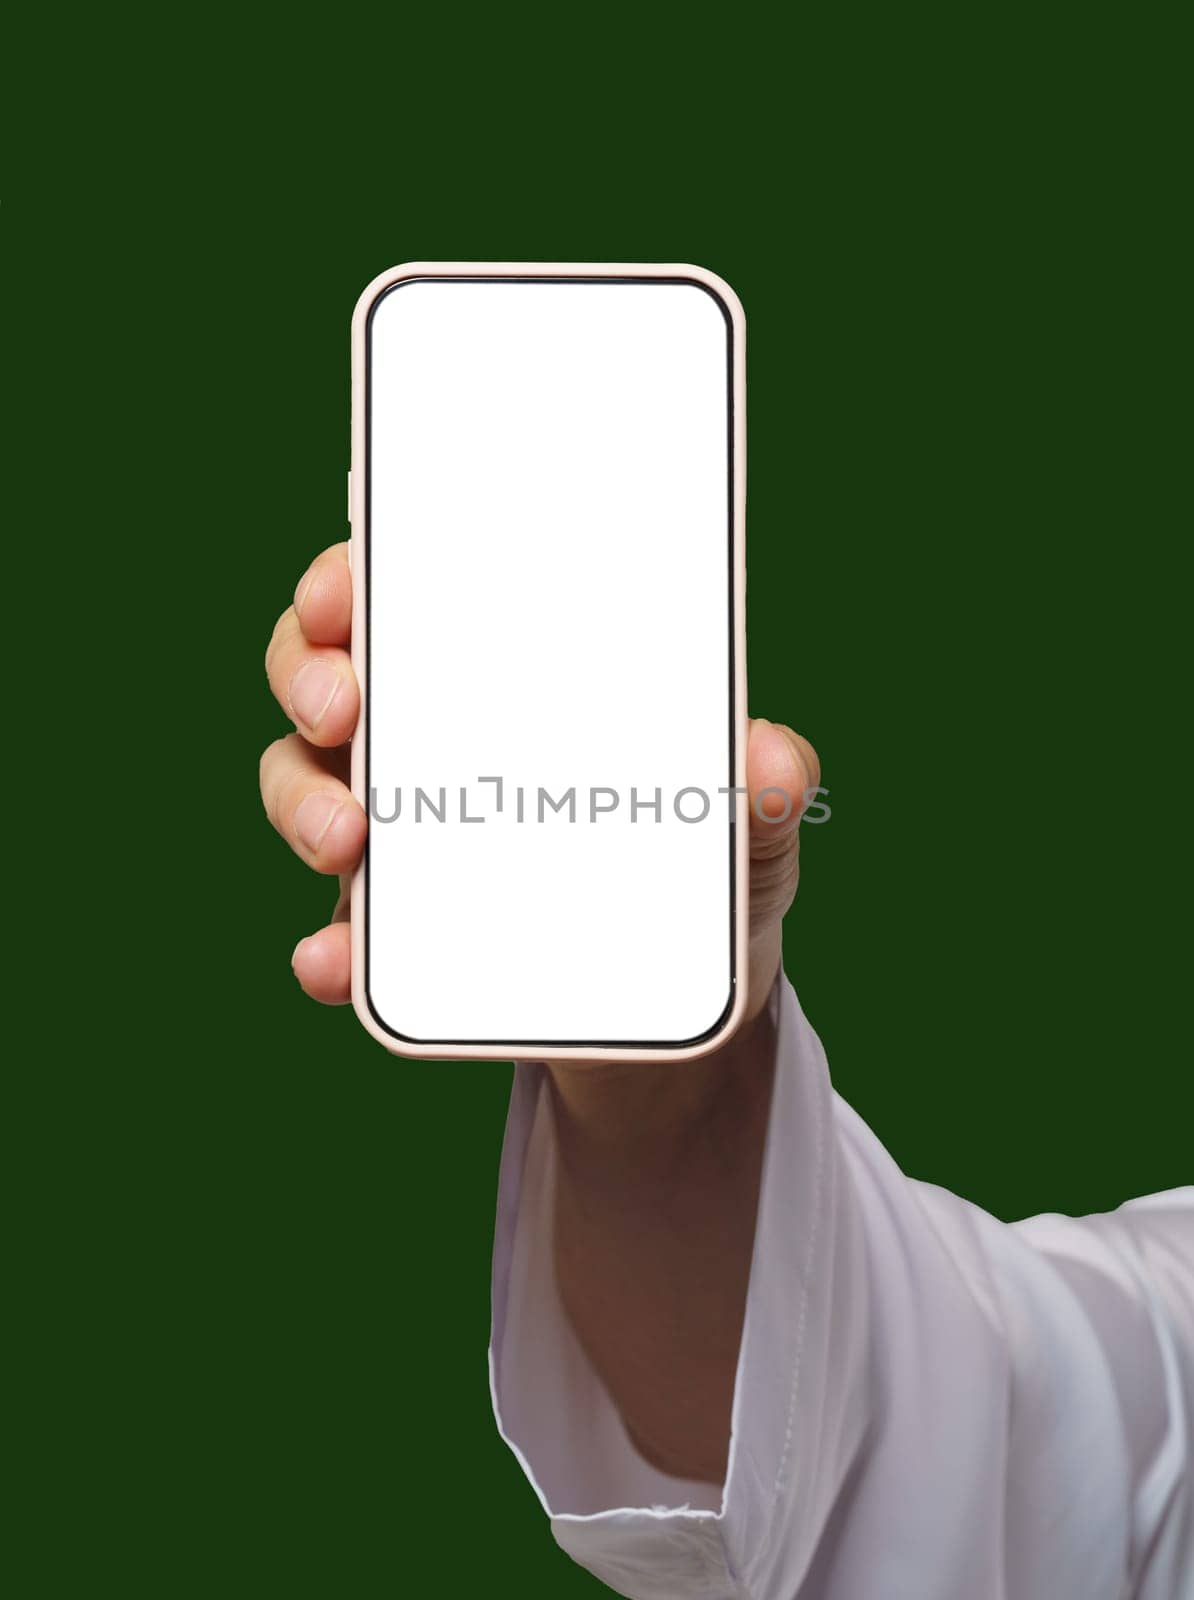 Man's hand holds smartphone with white screen on Islamic or Muslim green. Blank screen with space for copy or promotional content, ideal for app advertising and concepts with focus on Islamic audience. High quality photo